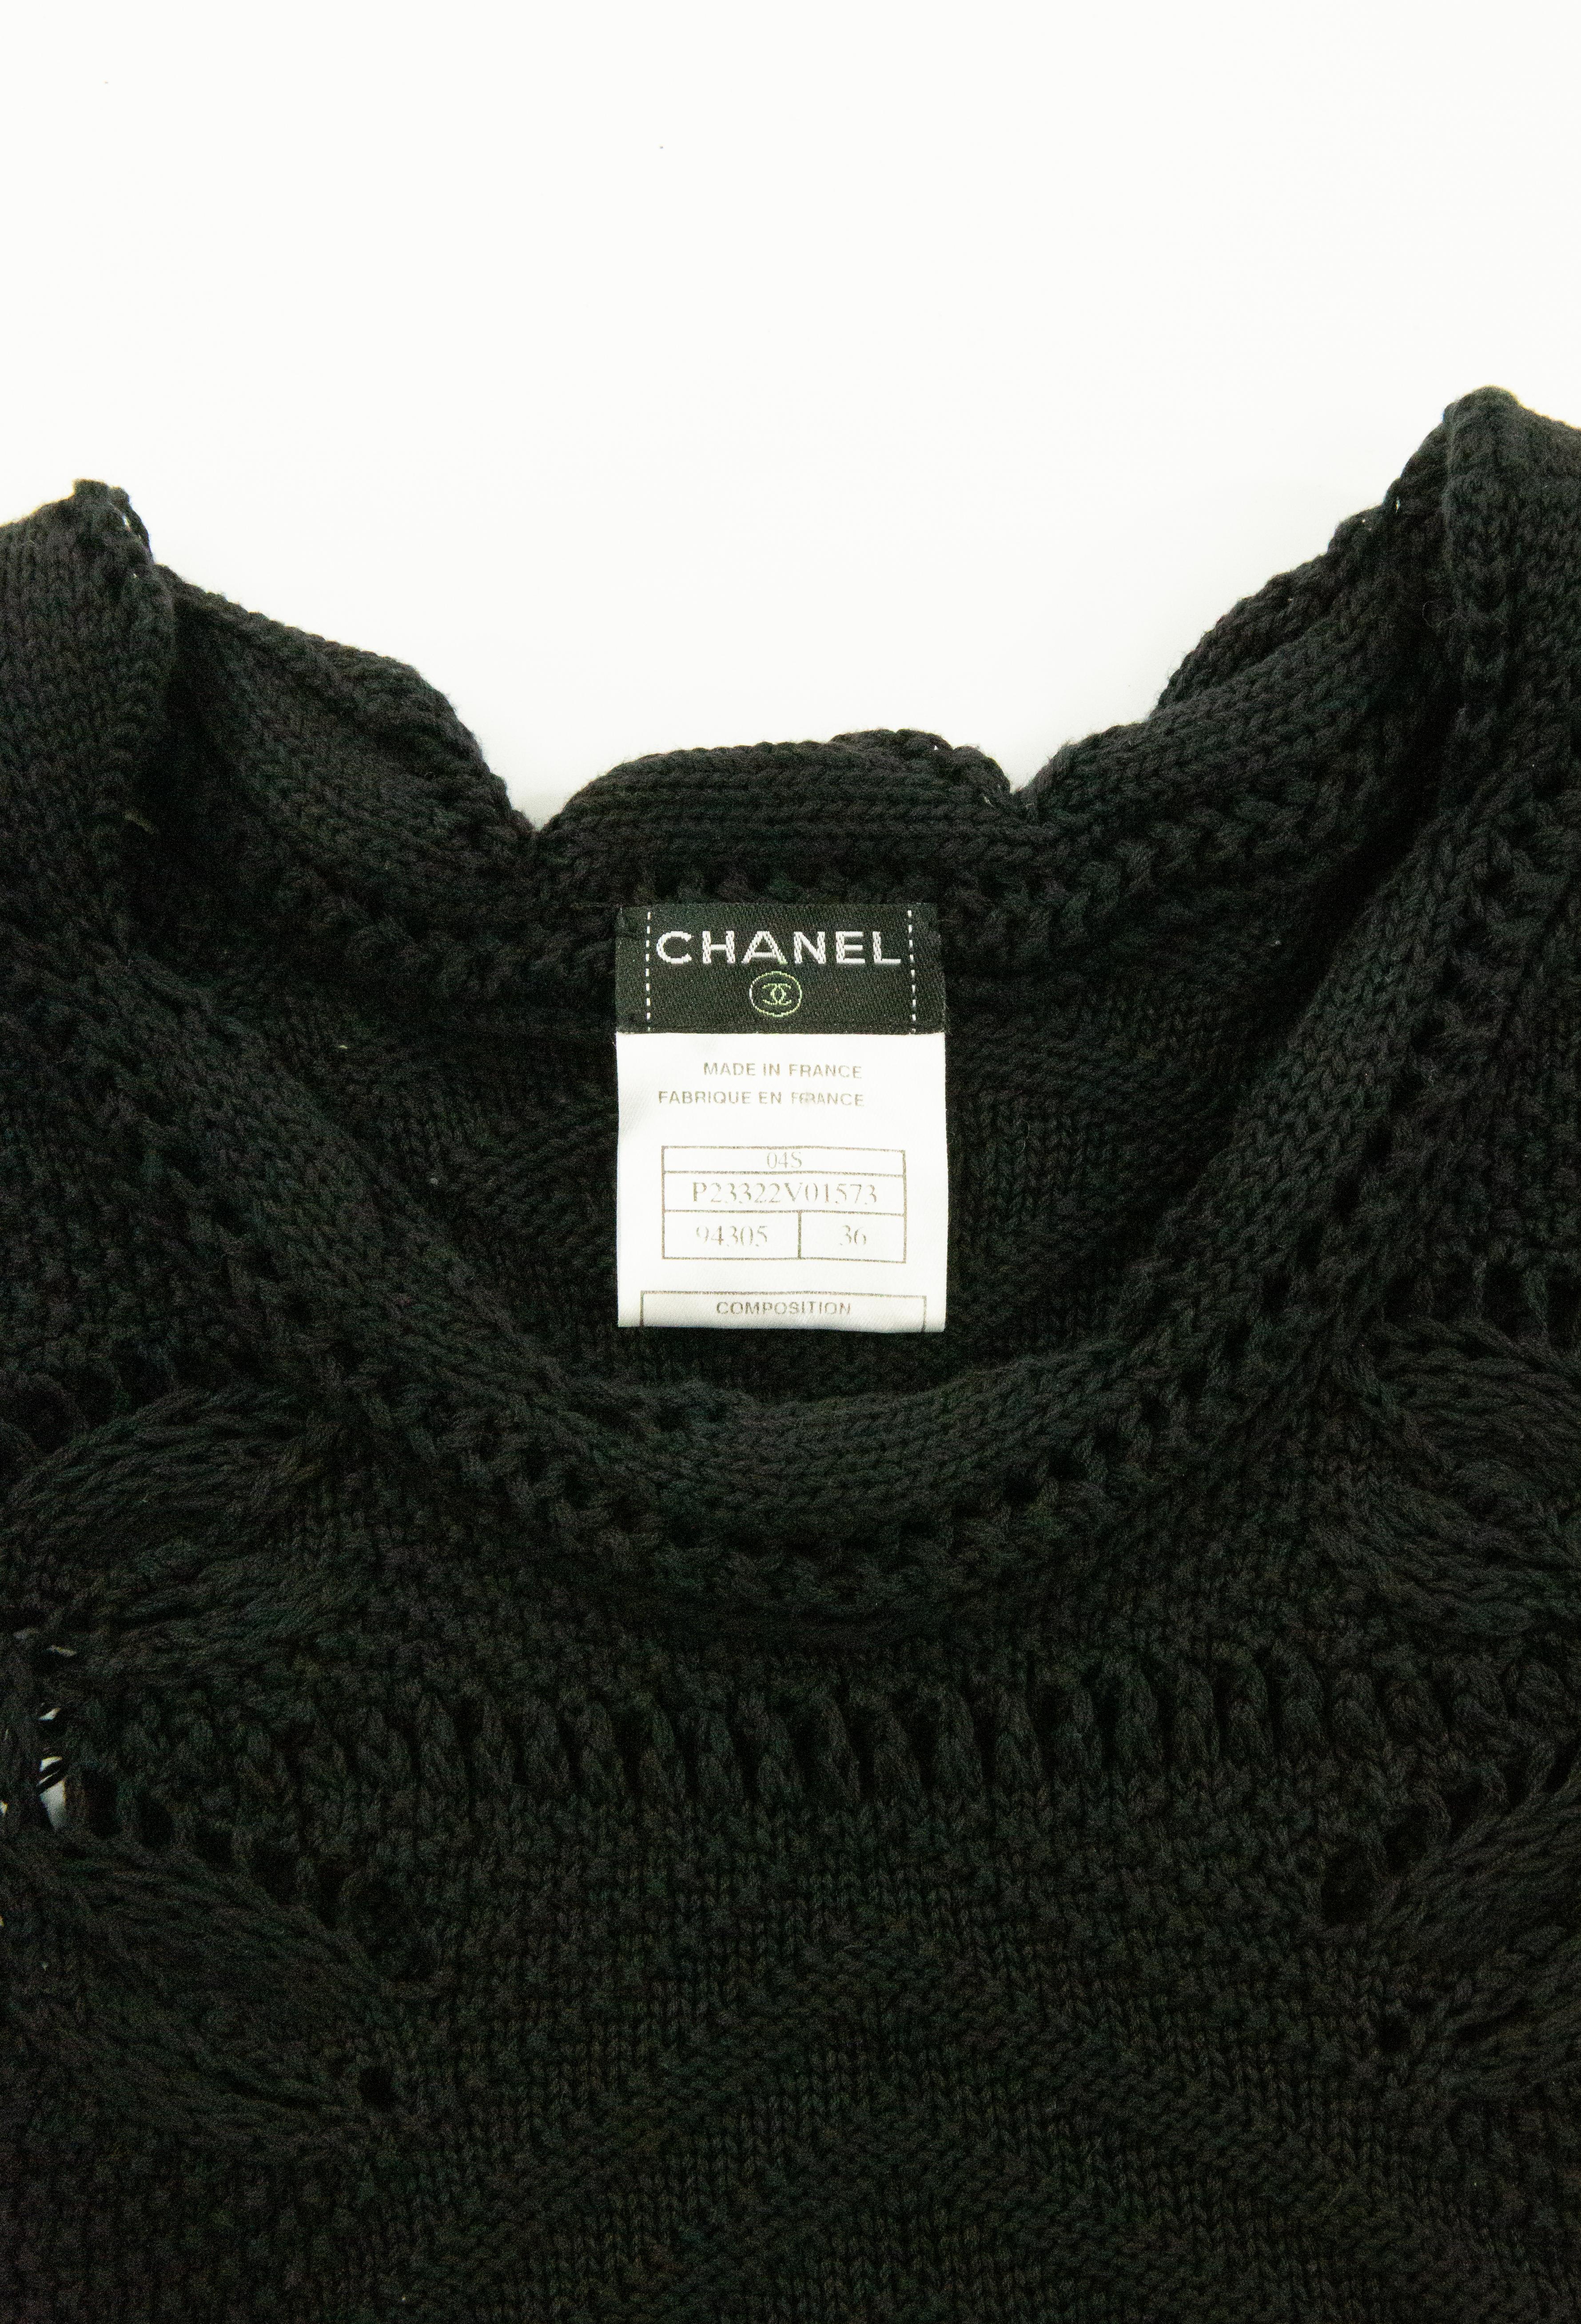 Chanel 2004 Summer Collection Crochet Dress For Sale 1